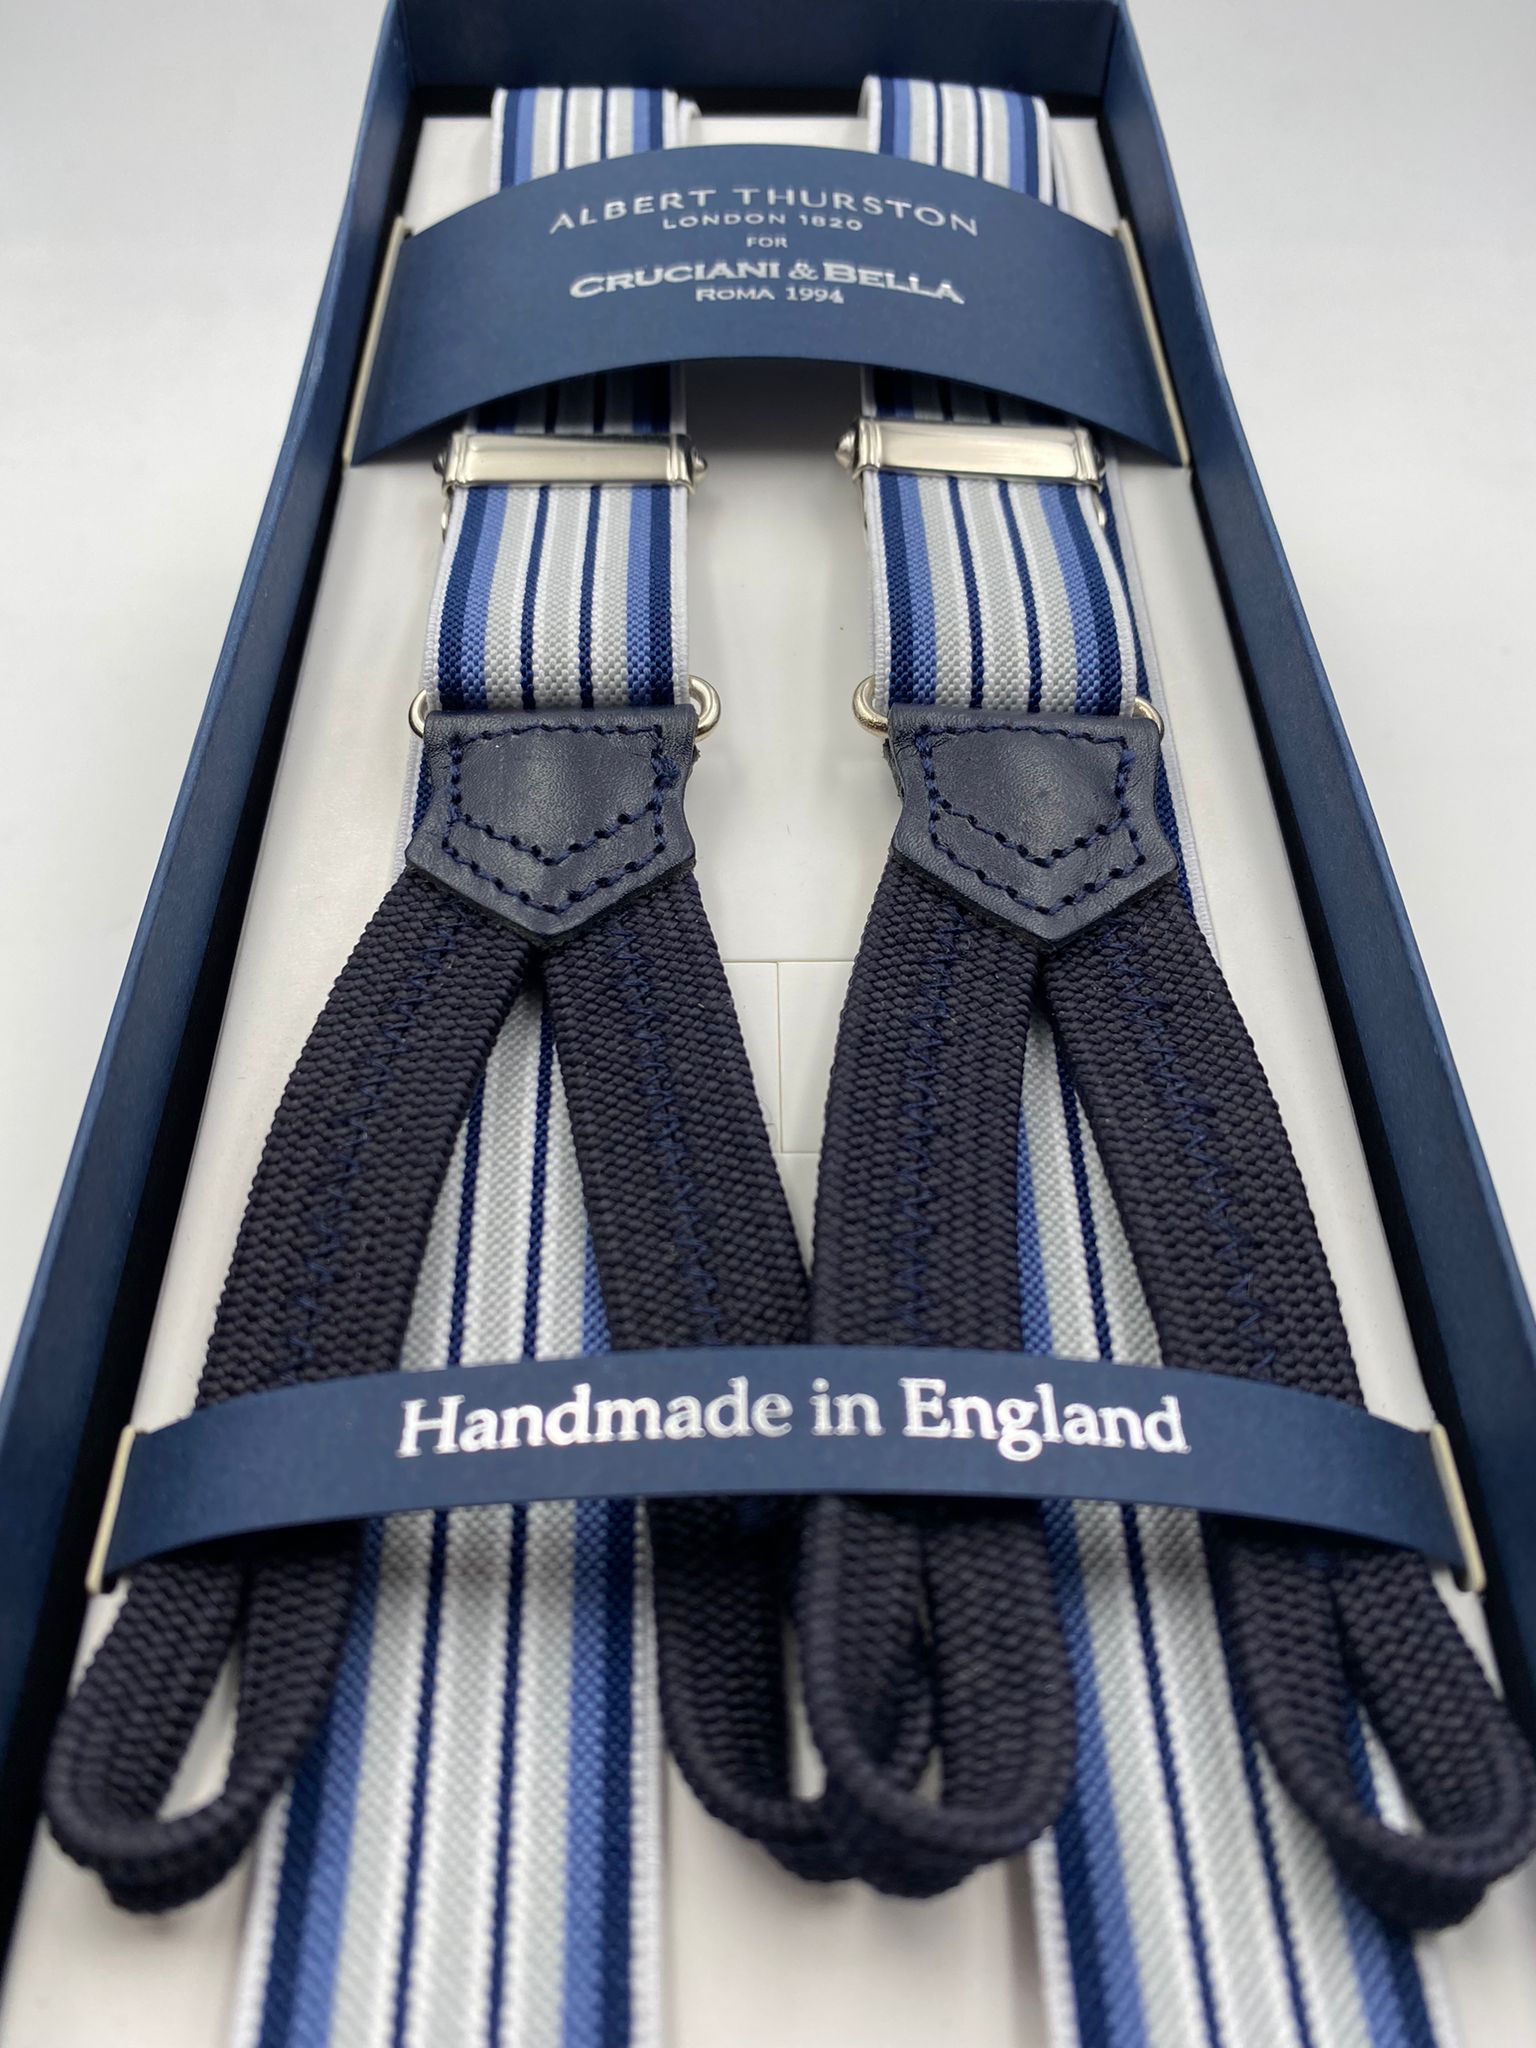 Albert Thurston for Cruciani & Bella Made in England Adjustable Sizing 25 mm elastic braces Blue, Grey and White Stripes Braid ends Y-Shaped Nickel Fittings Size: L #5666